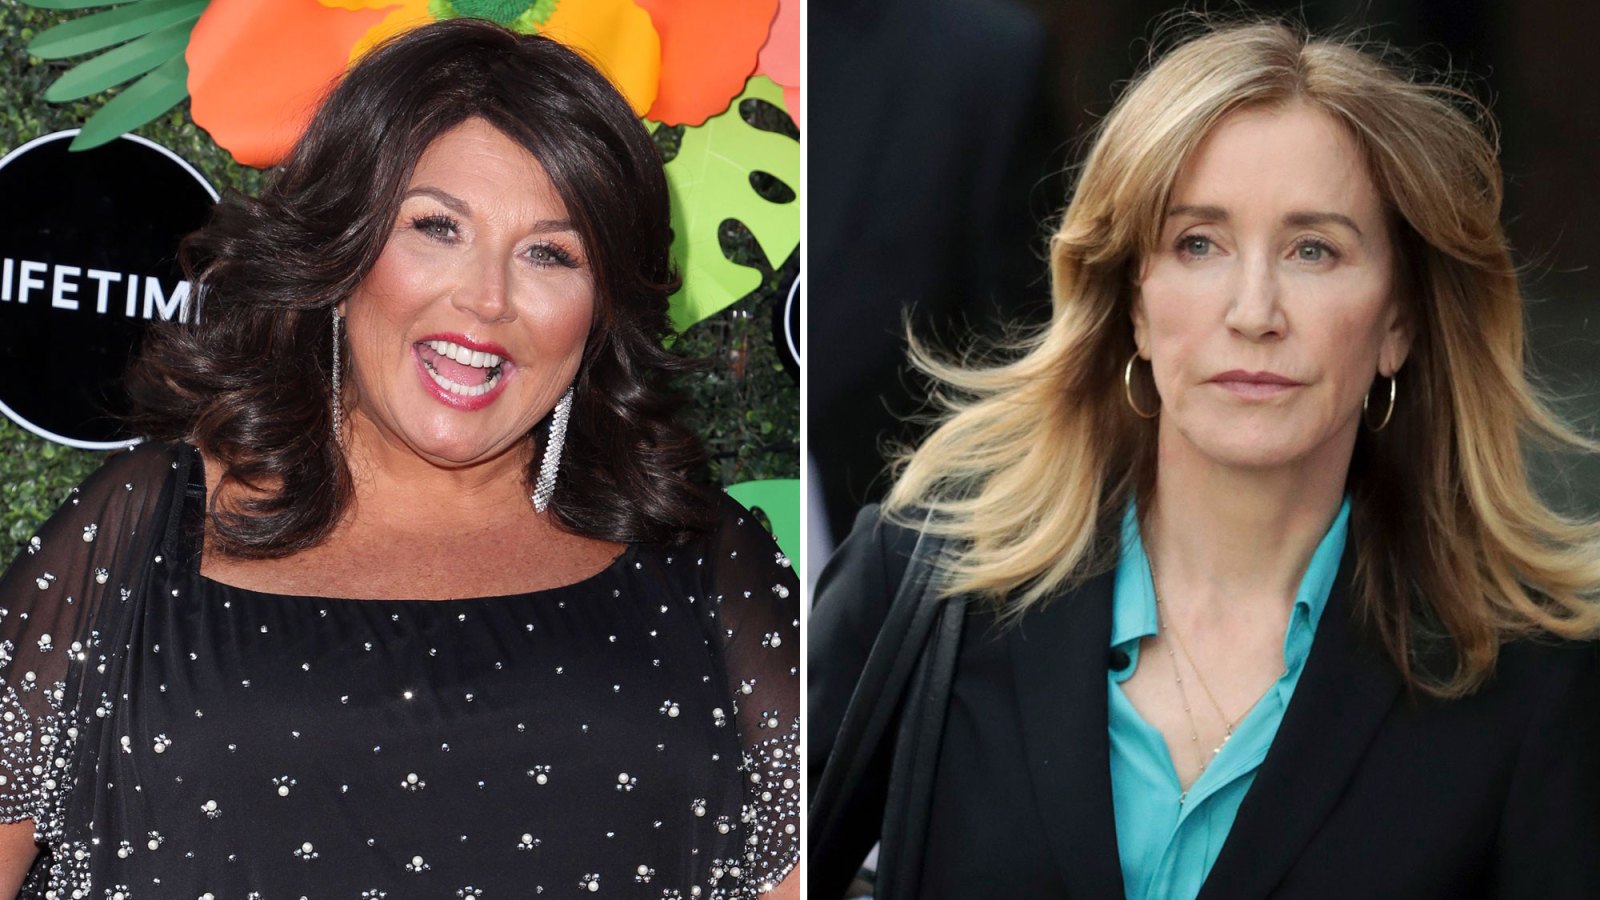 Abby Lee Miller Details What Felicity Huffman's 14 Days in Prison May Be Like